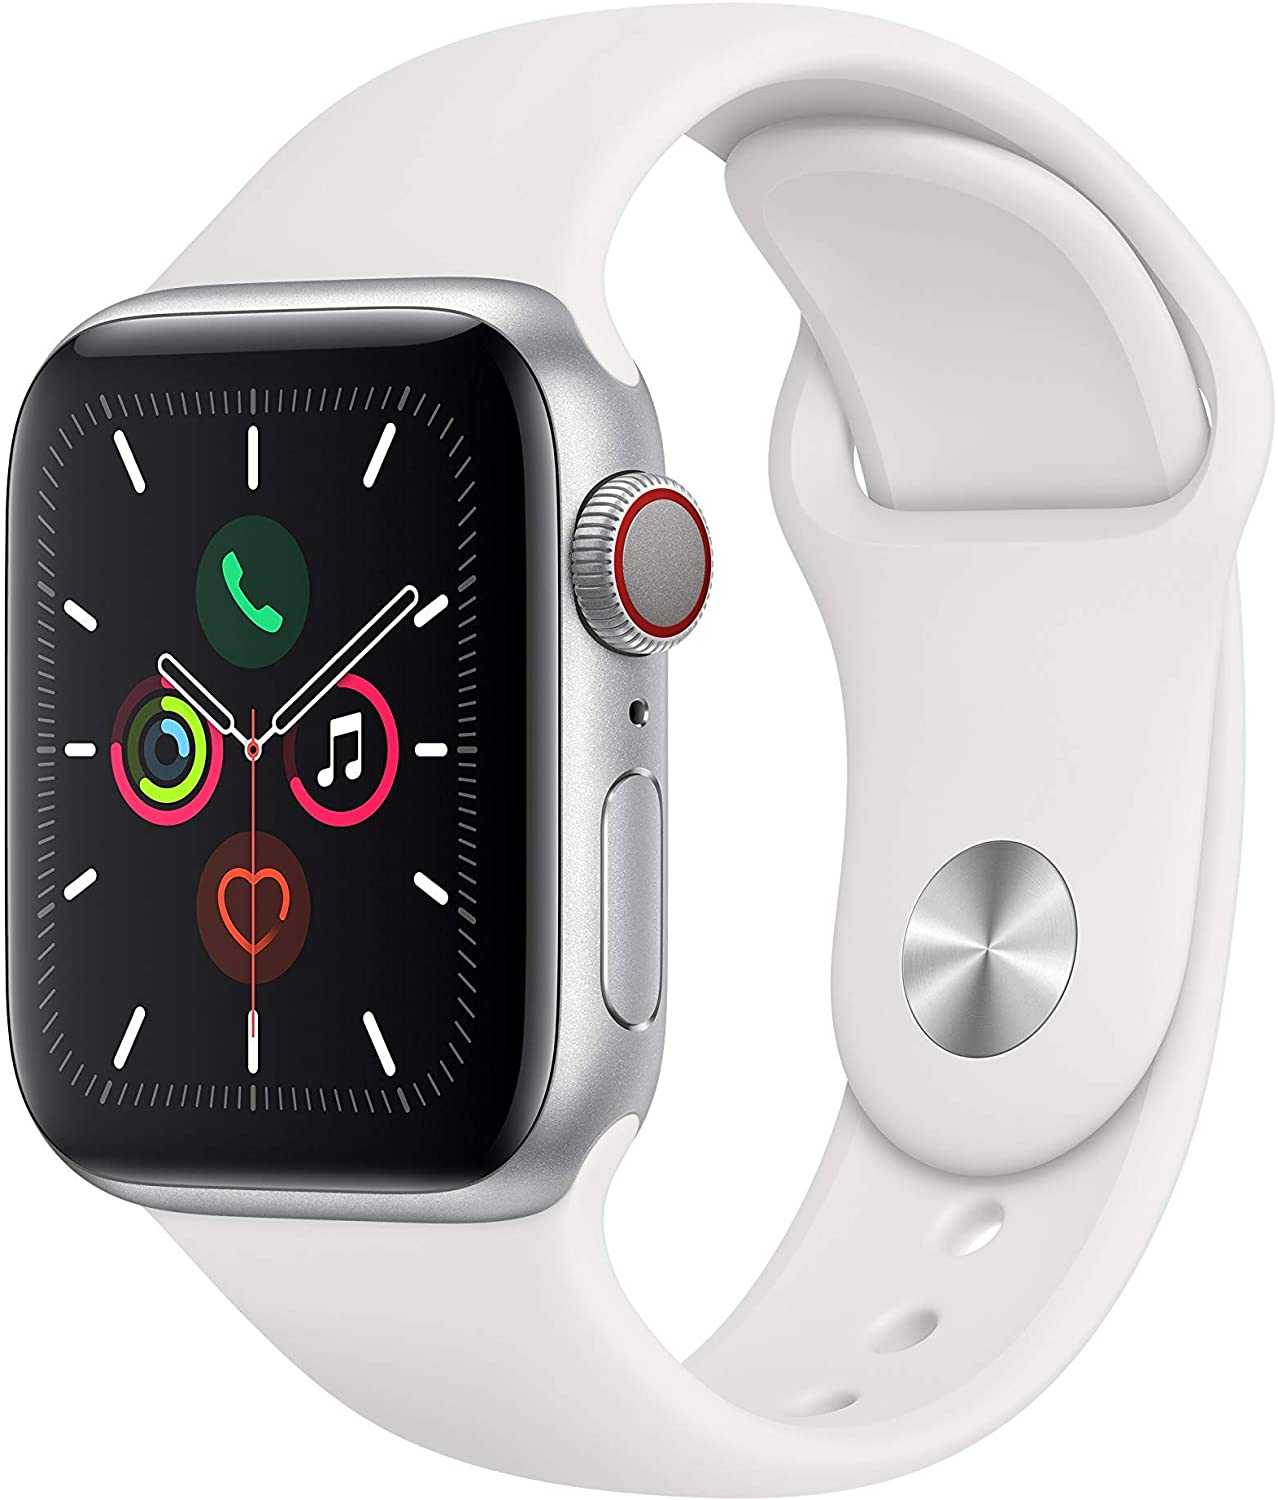 Apple Watch Series 5 (GPS + Cellular, 40MM) - Silver Aluminum Case with White Sport Band (Renewed)